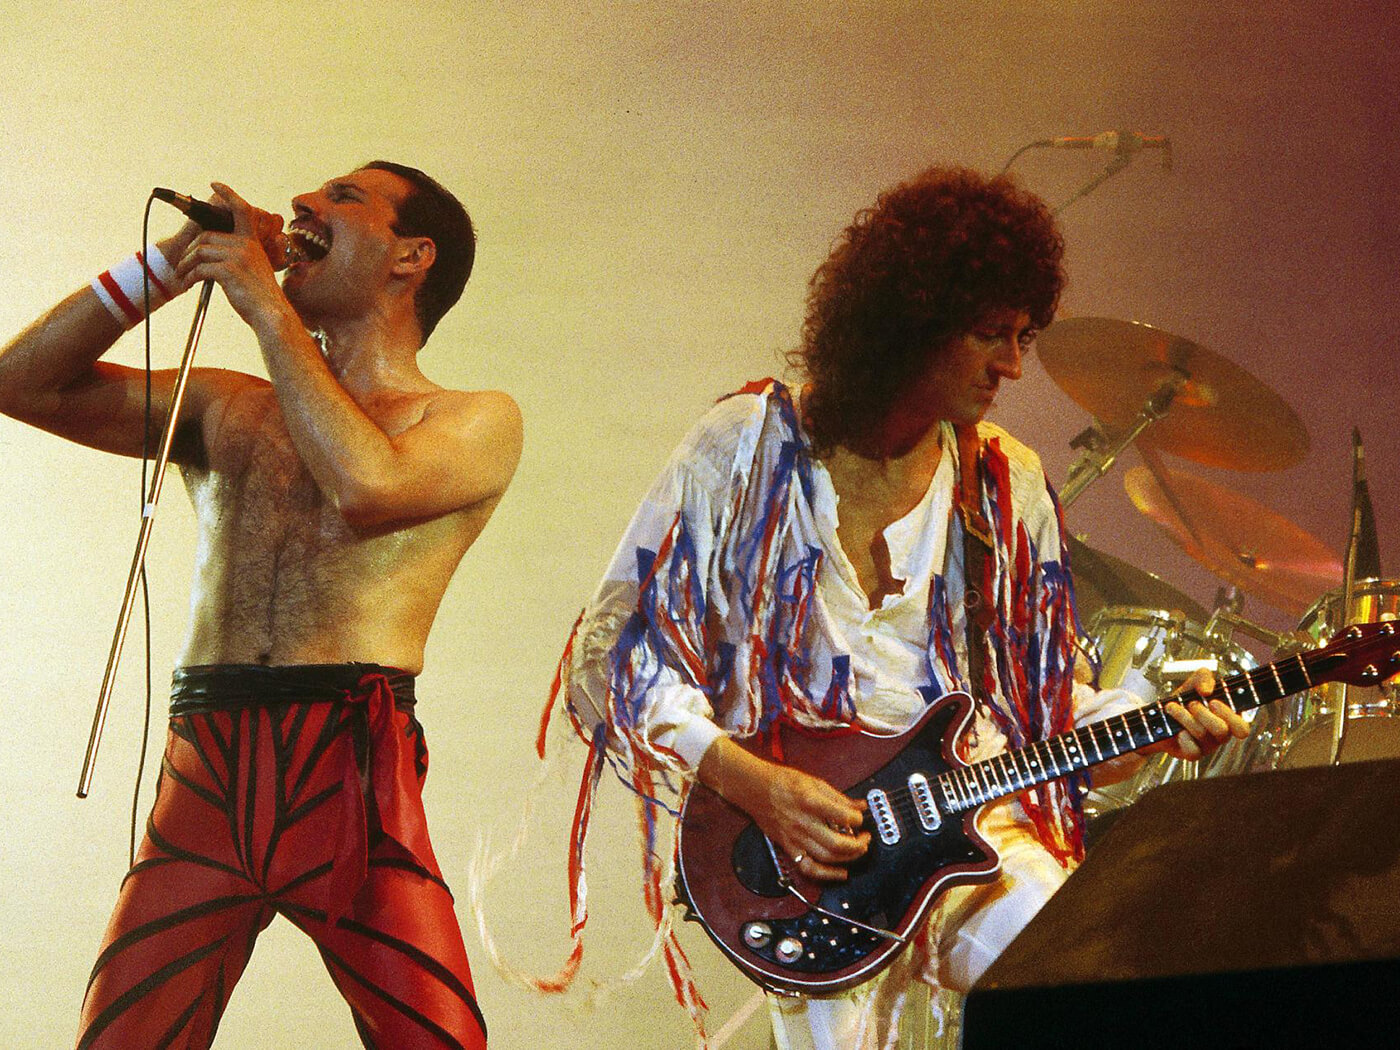 Freddie Mercury and Brian May of Queen perform live in 1985